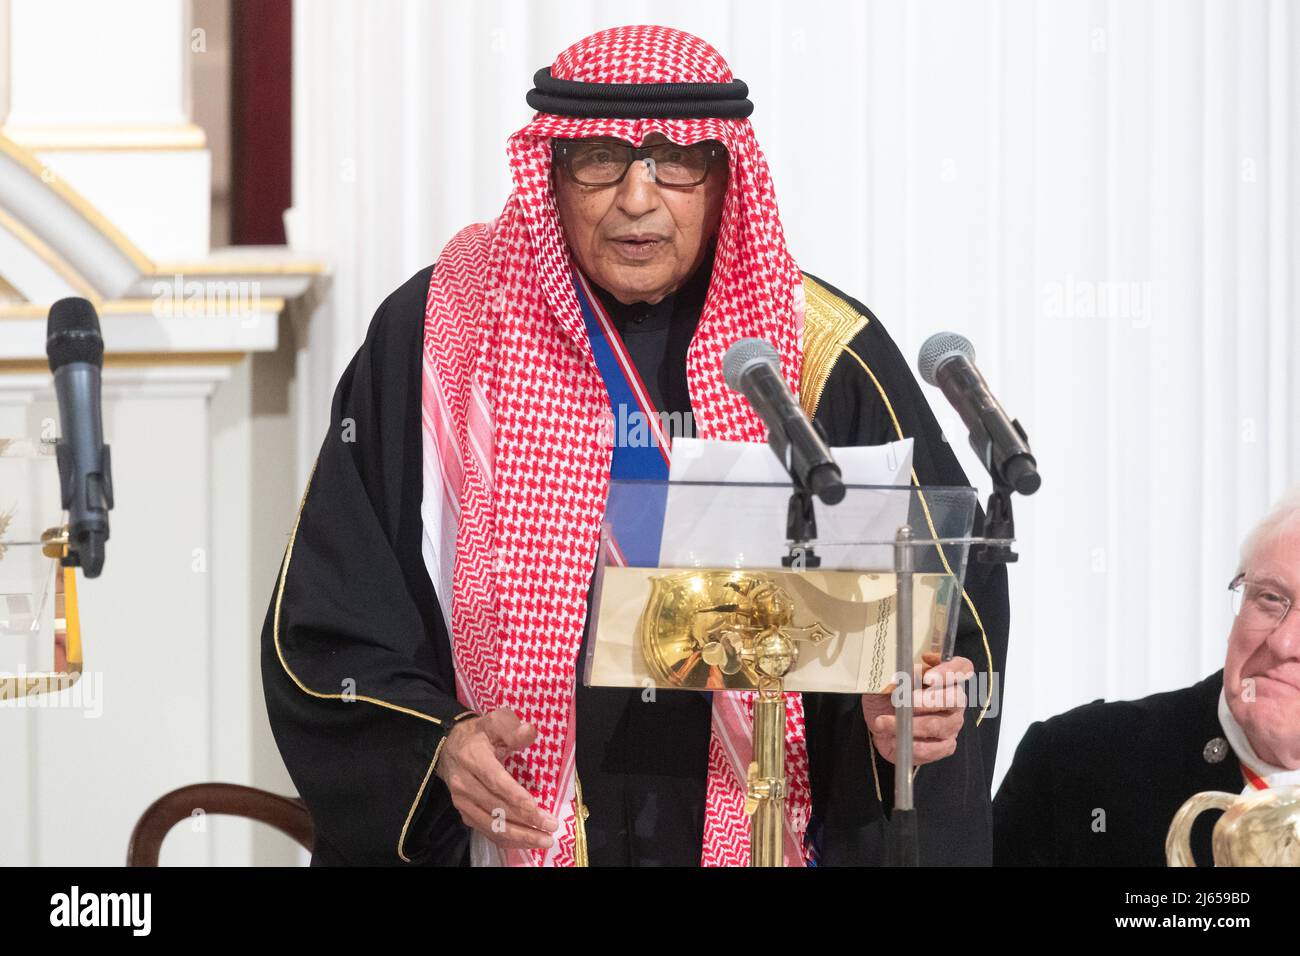 27 April 2022. London, UK. Photo by Ray Tang. His Excellency Khaled Abdulaziz Al-Duwaisan GCVO, The Ambassador of the State of Kuwait makes a speech at the annual City of London Easter Banquet held at Mansion House. Stock Photo